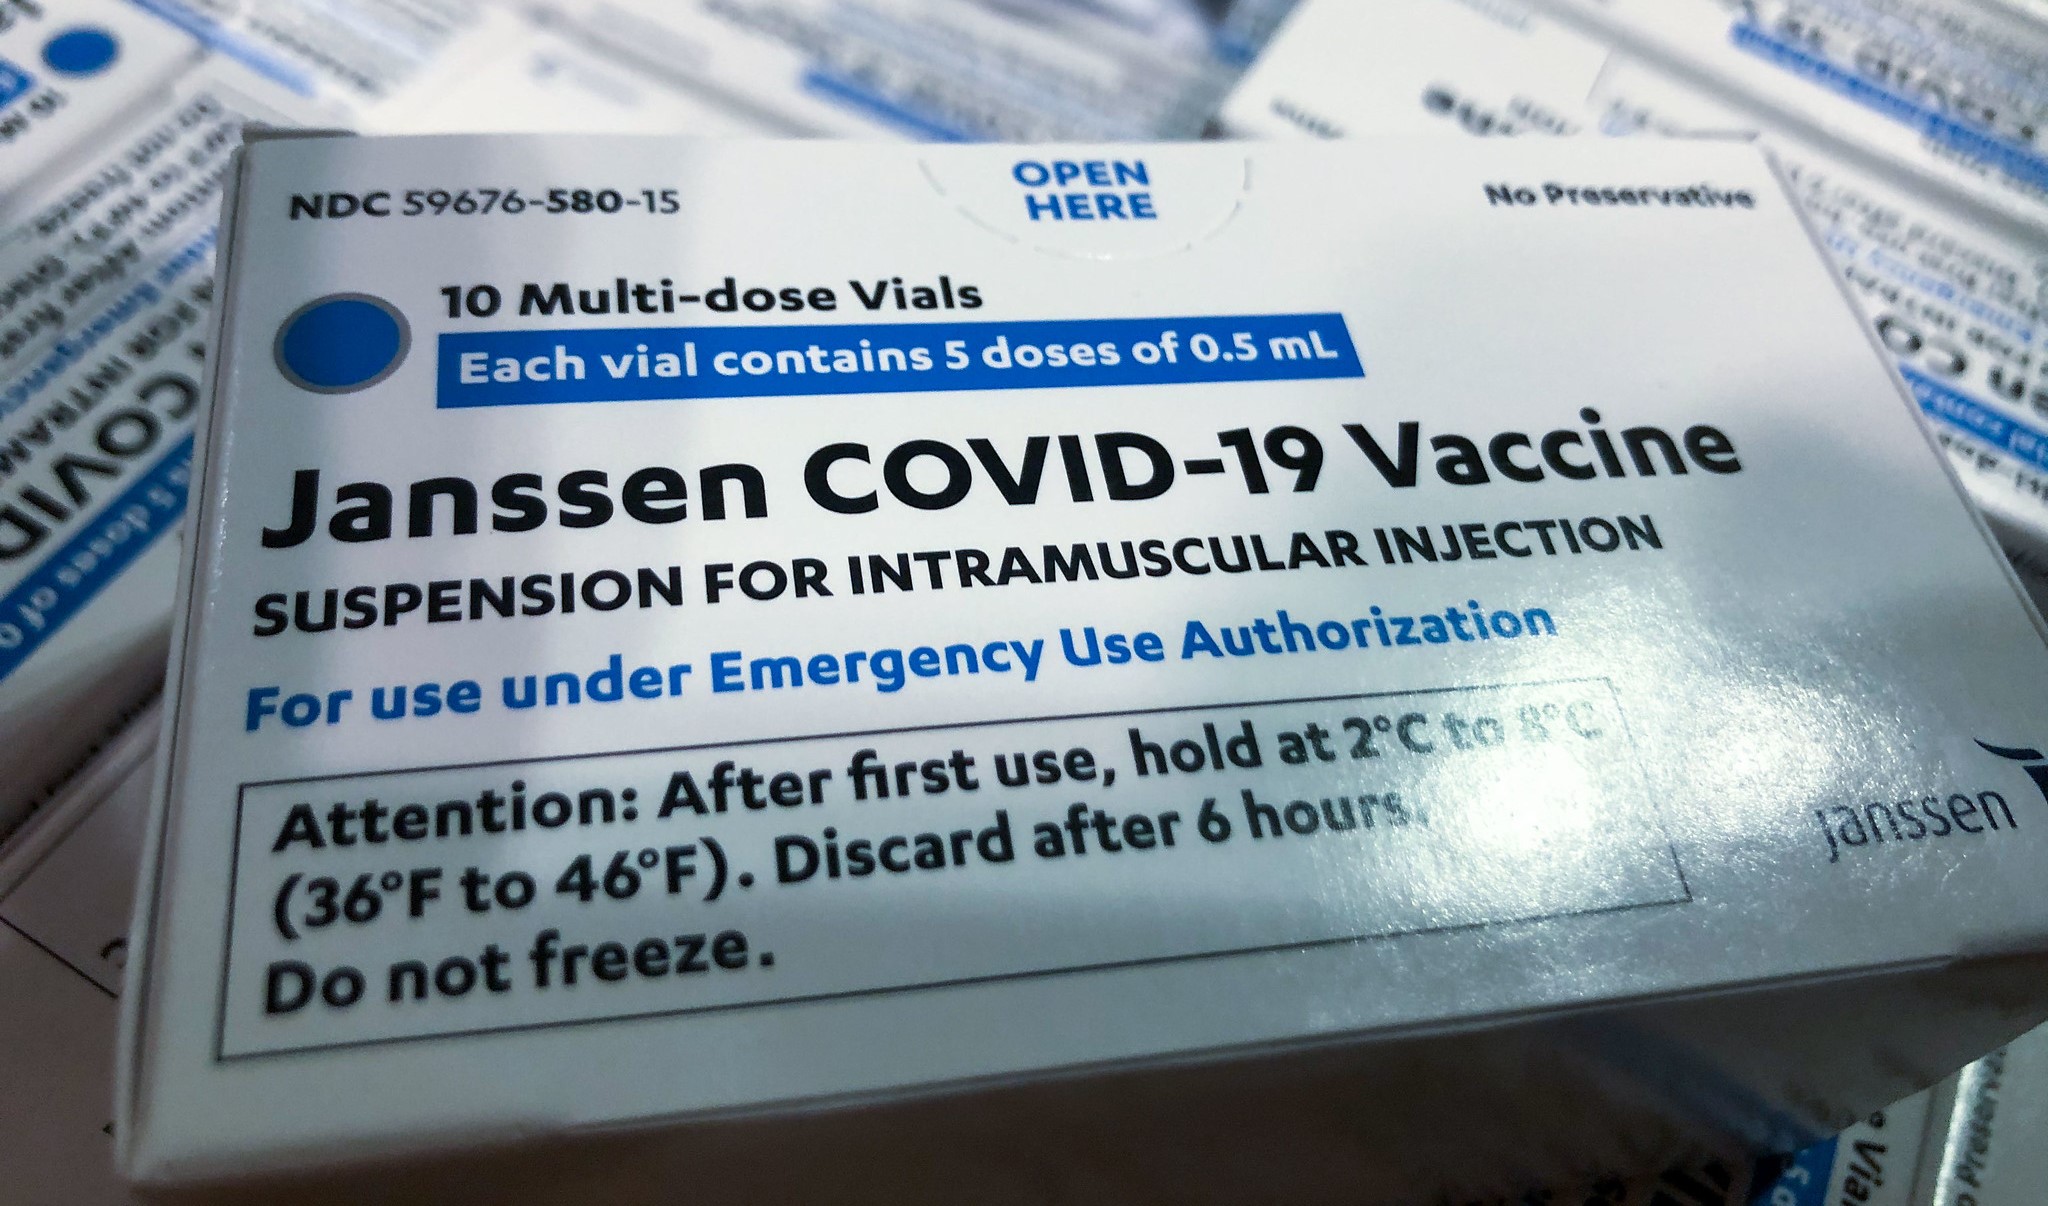 Janssen vaccine approved for use – Expert Reaction